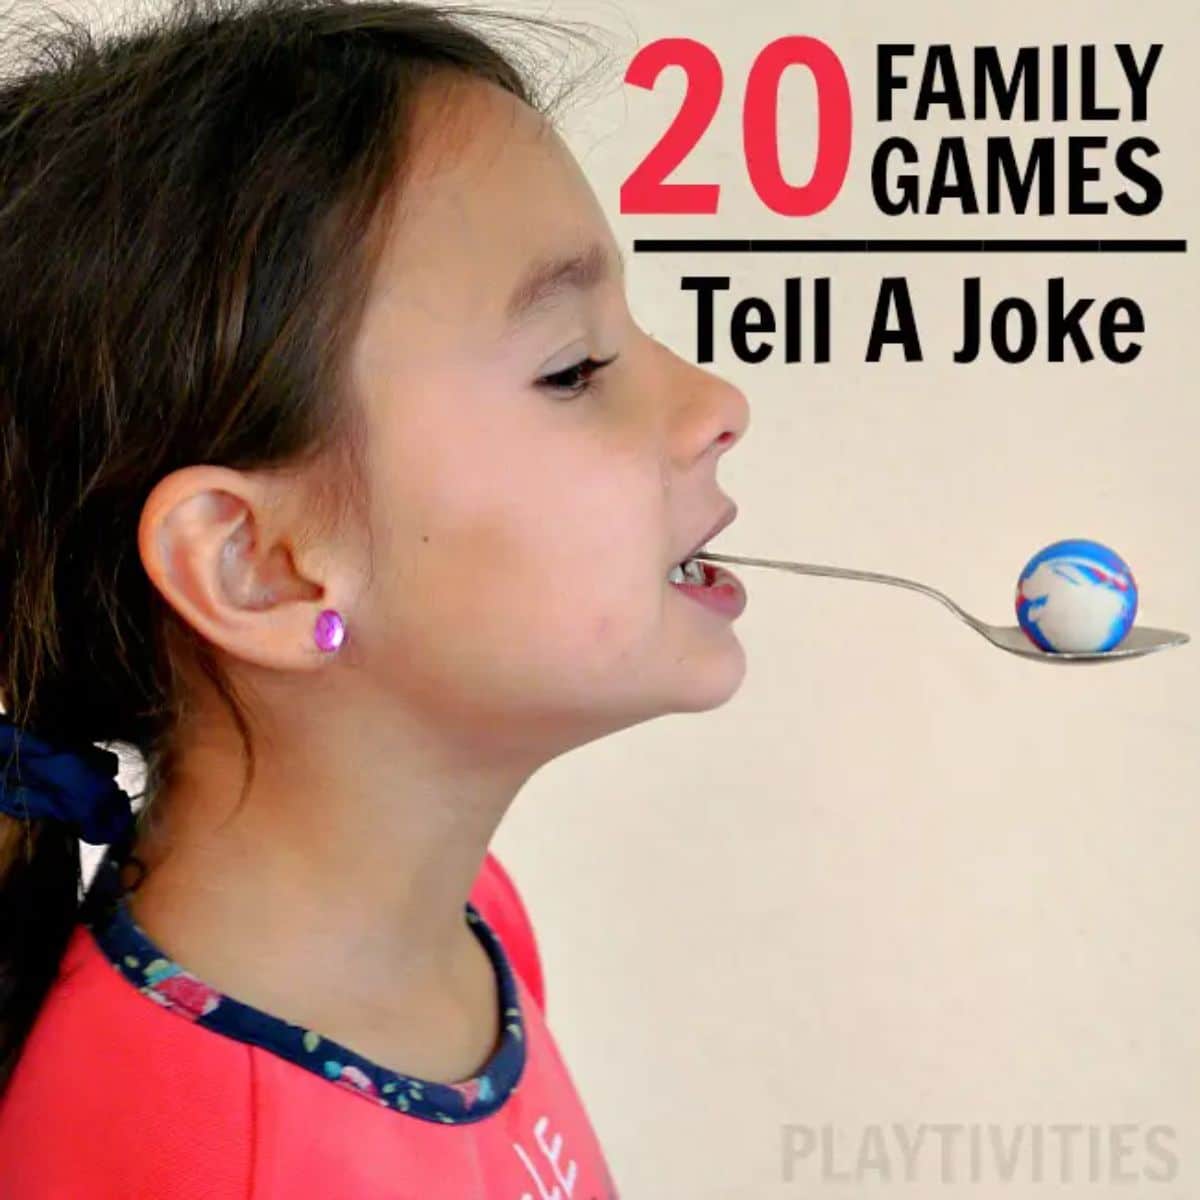 The text reads "20 family games: tell a joke" the image is of a girl holding a spoon in her mouth with a bouncy ball balanced on it